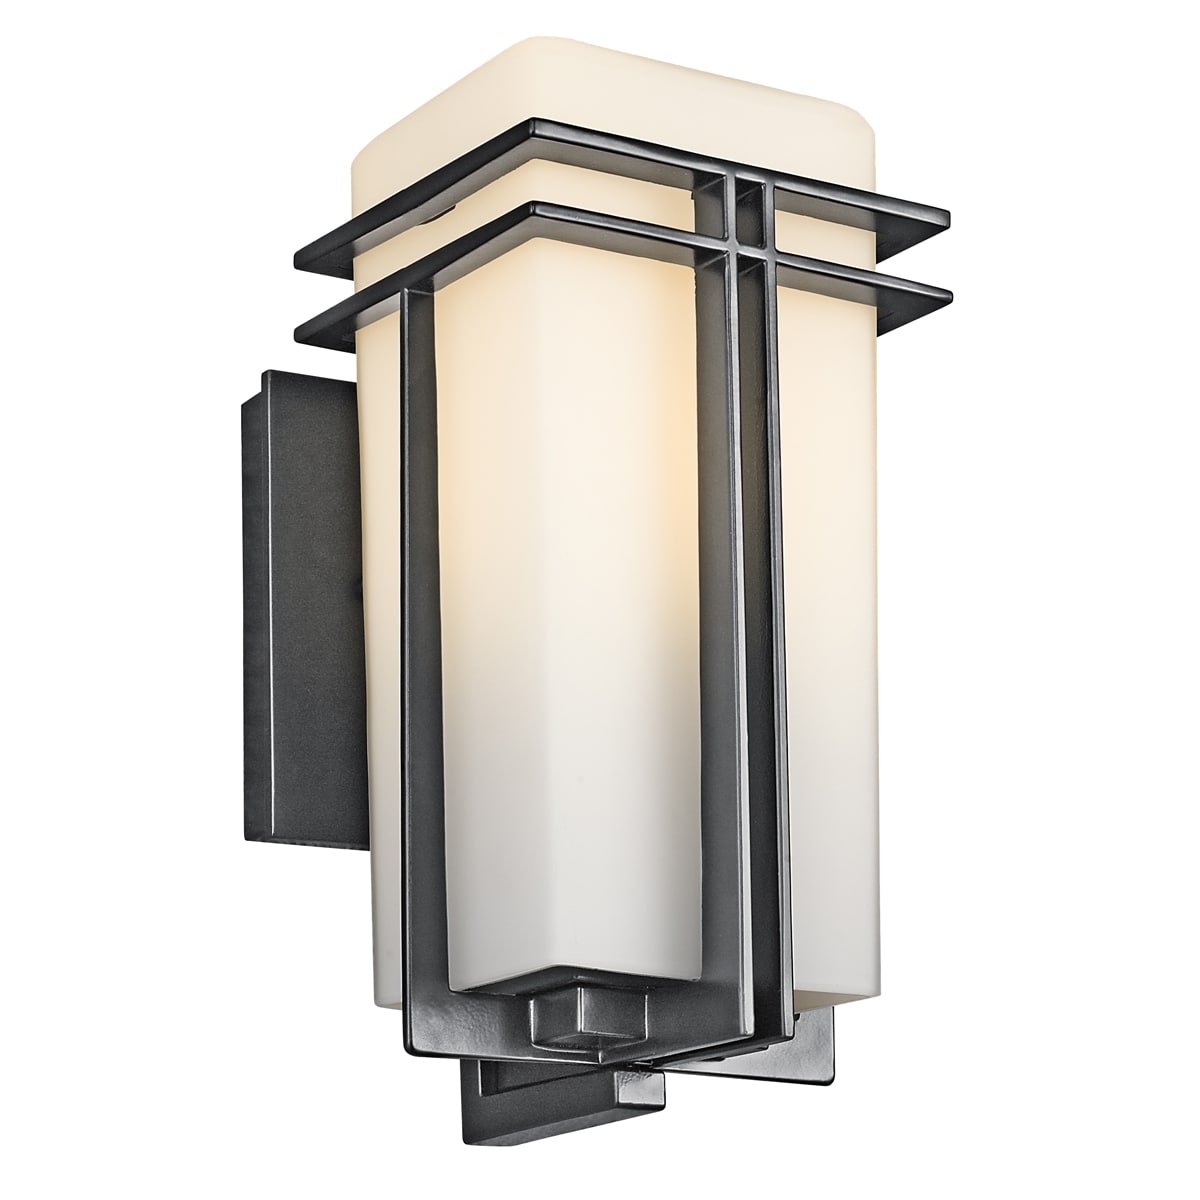 Kichler 49200BK (Painted) Tremillo Single Light 12" Tall Outdoor Sconce with Glass - LightingShowplace.com